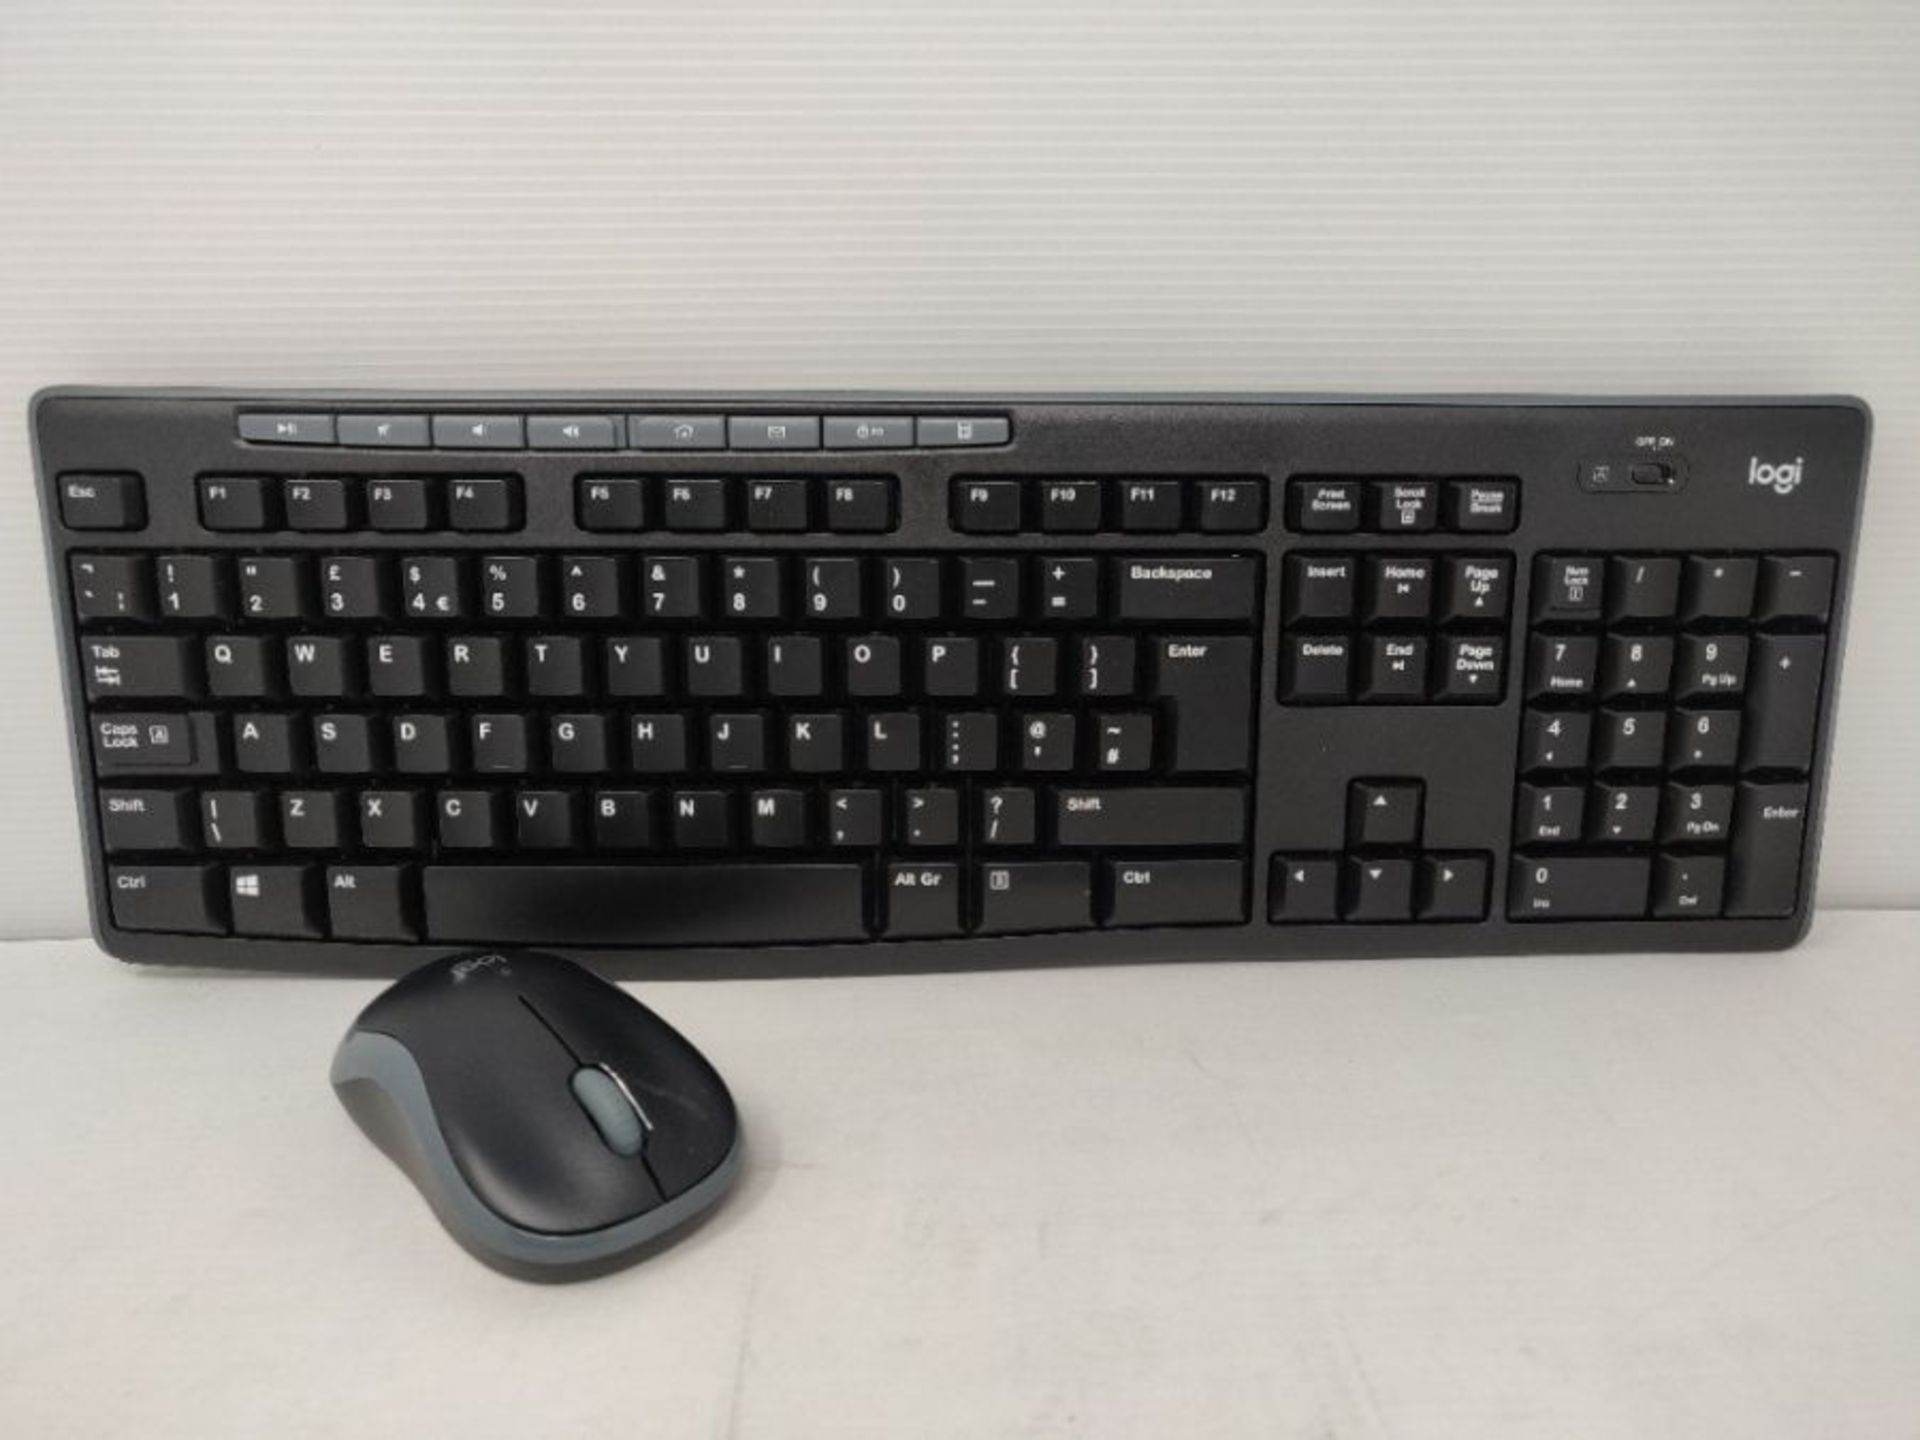 [INCOMPLETE] Logitech MK270 Wireless Keyboard and Mouse Combo for Windows, 2.4 GHz Wir - Image 3 of 3